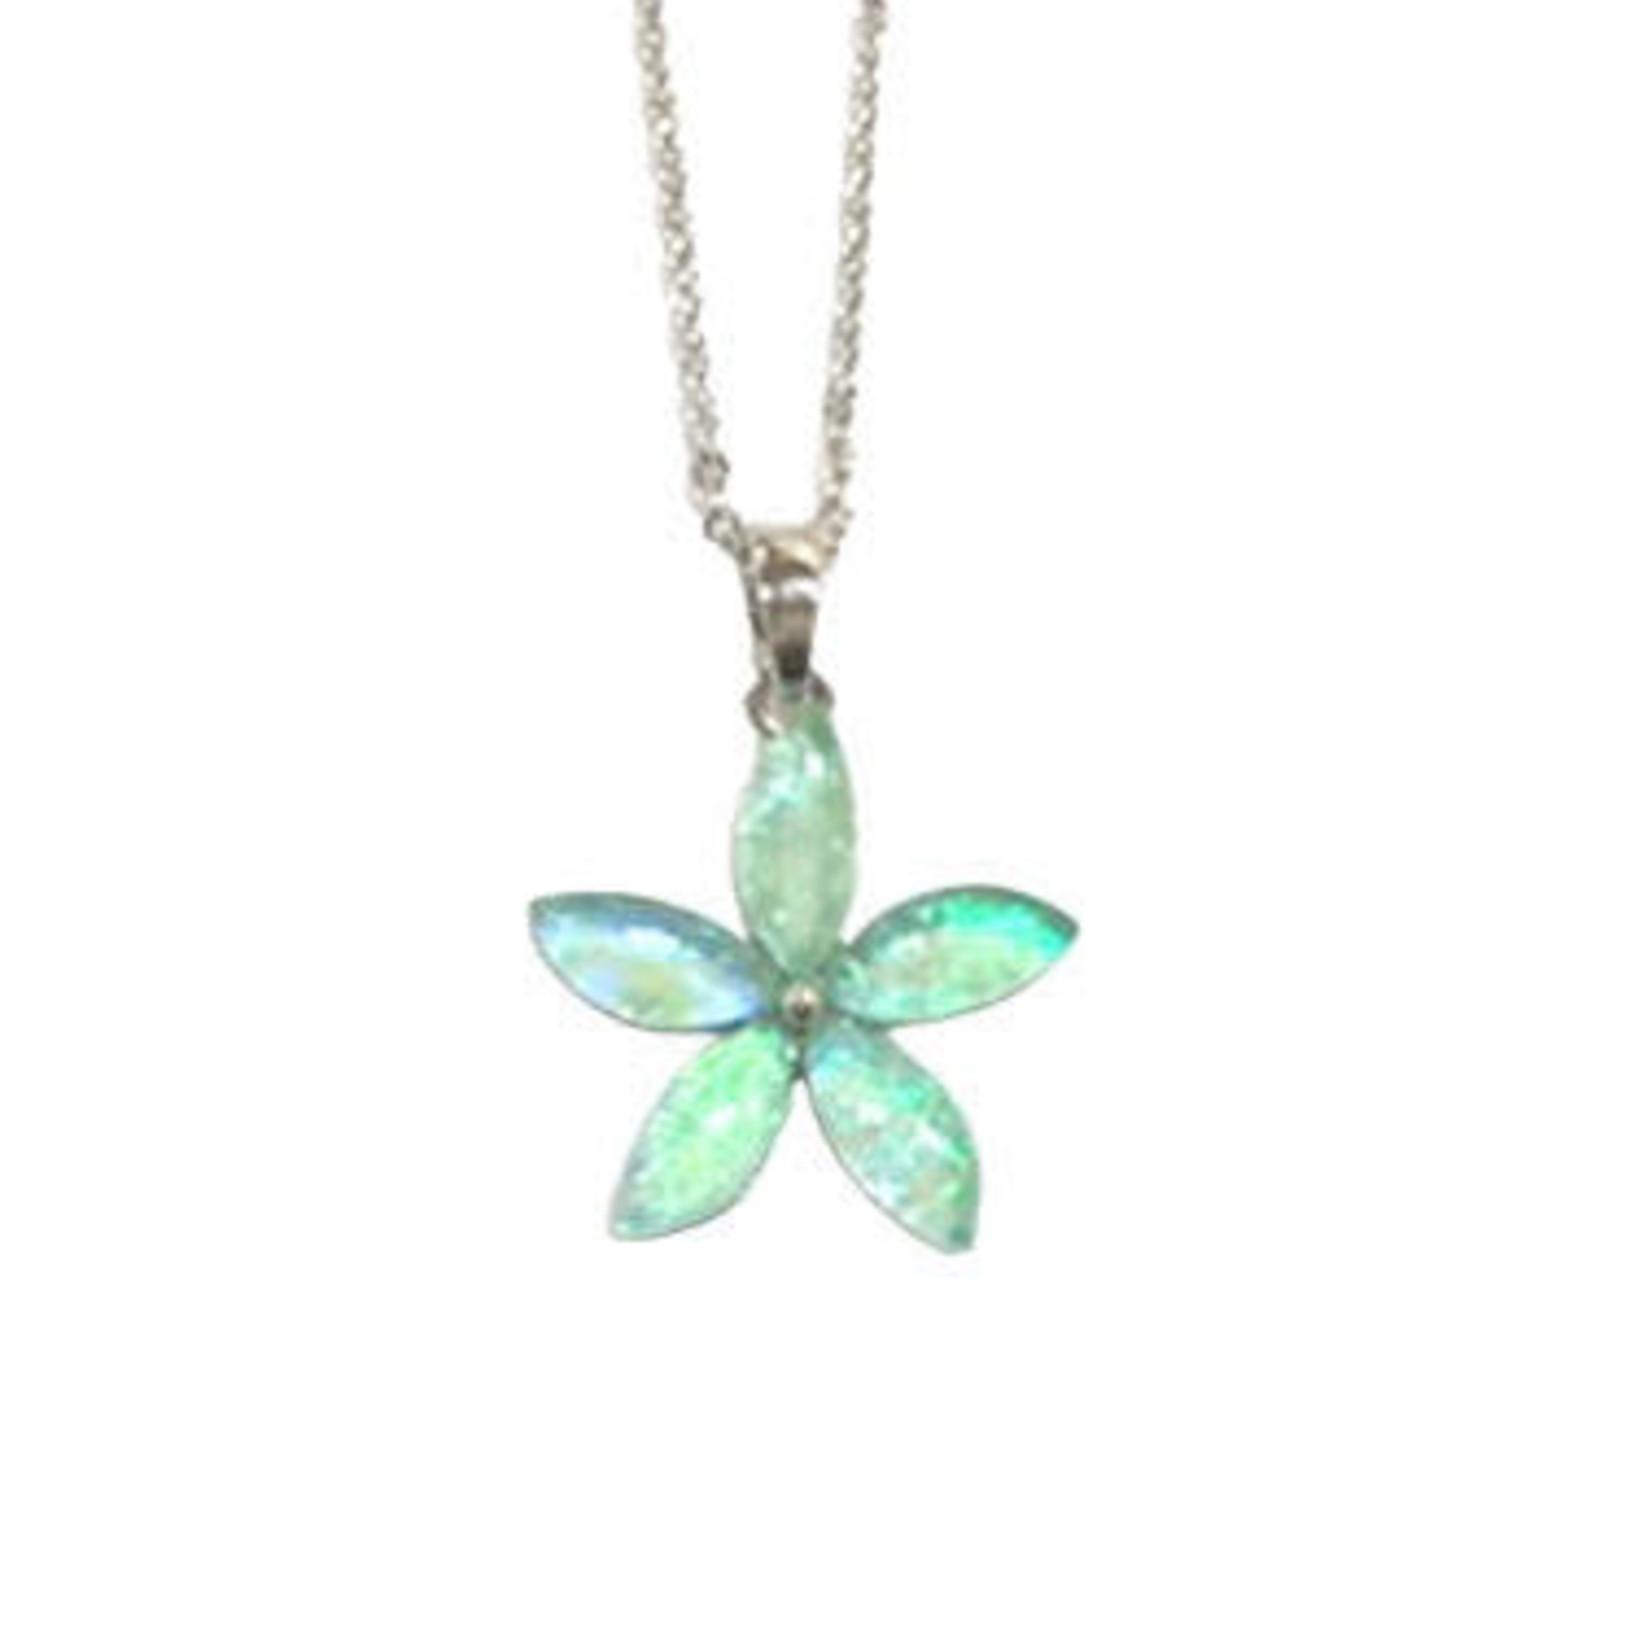 Opal Inspired Resin Pendant with Chain Flower